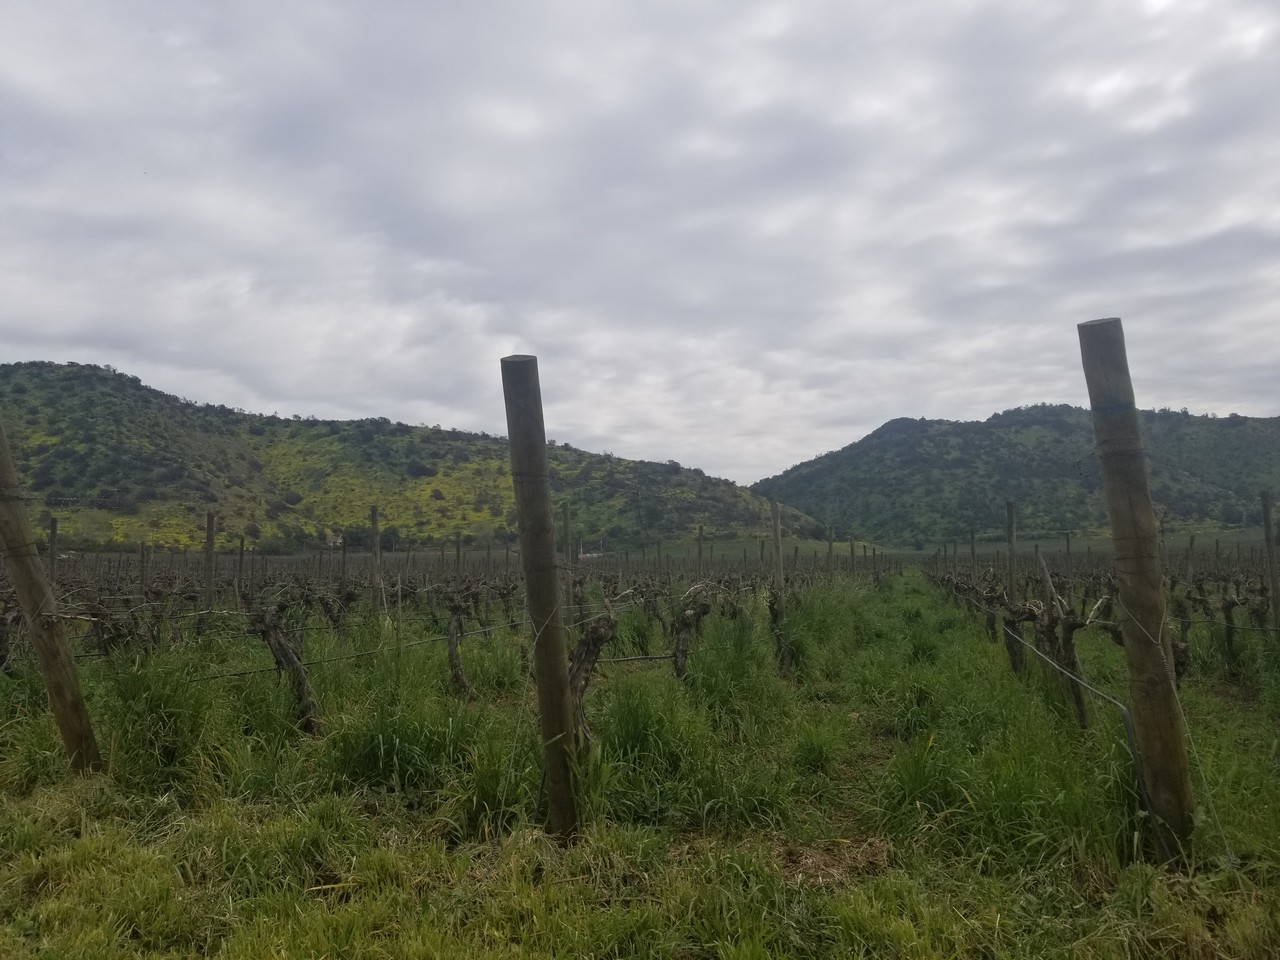 a field of vines with mountains in the background